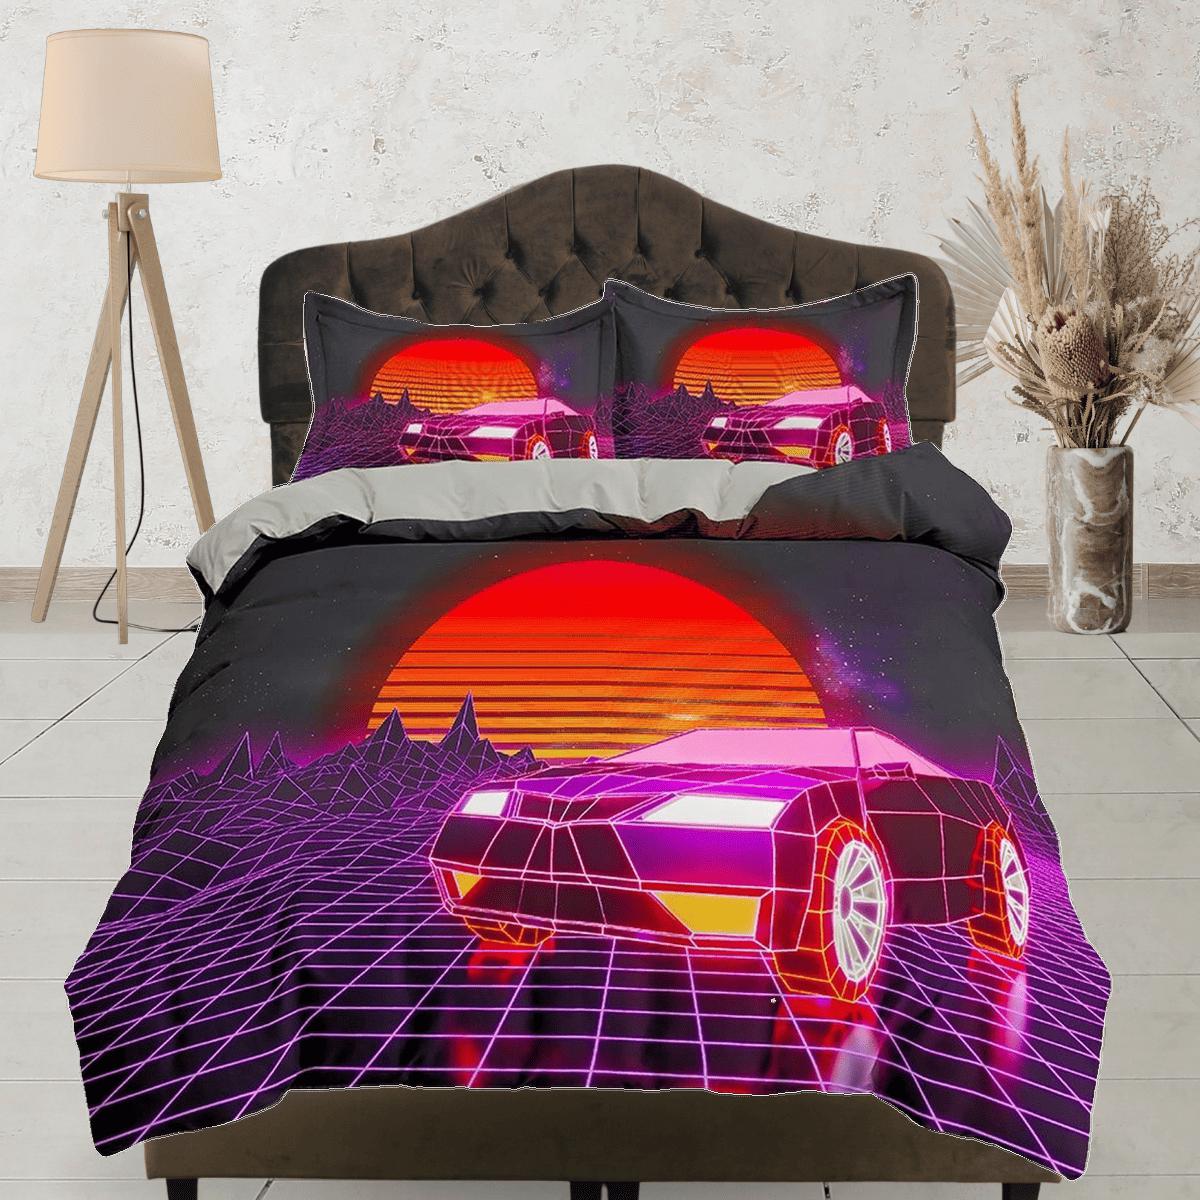 daintyduvet Vaporwave Retro Car in Sunset Bedding, Cool Hippie Duvet Cover Set for Boys Bedroom, Trippy Psychedelic Bed Cover, King Queen Full Twin Bed